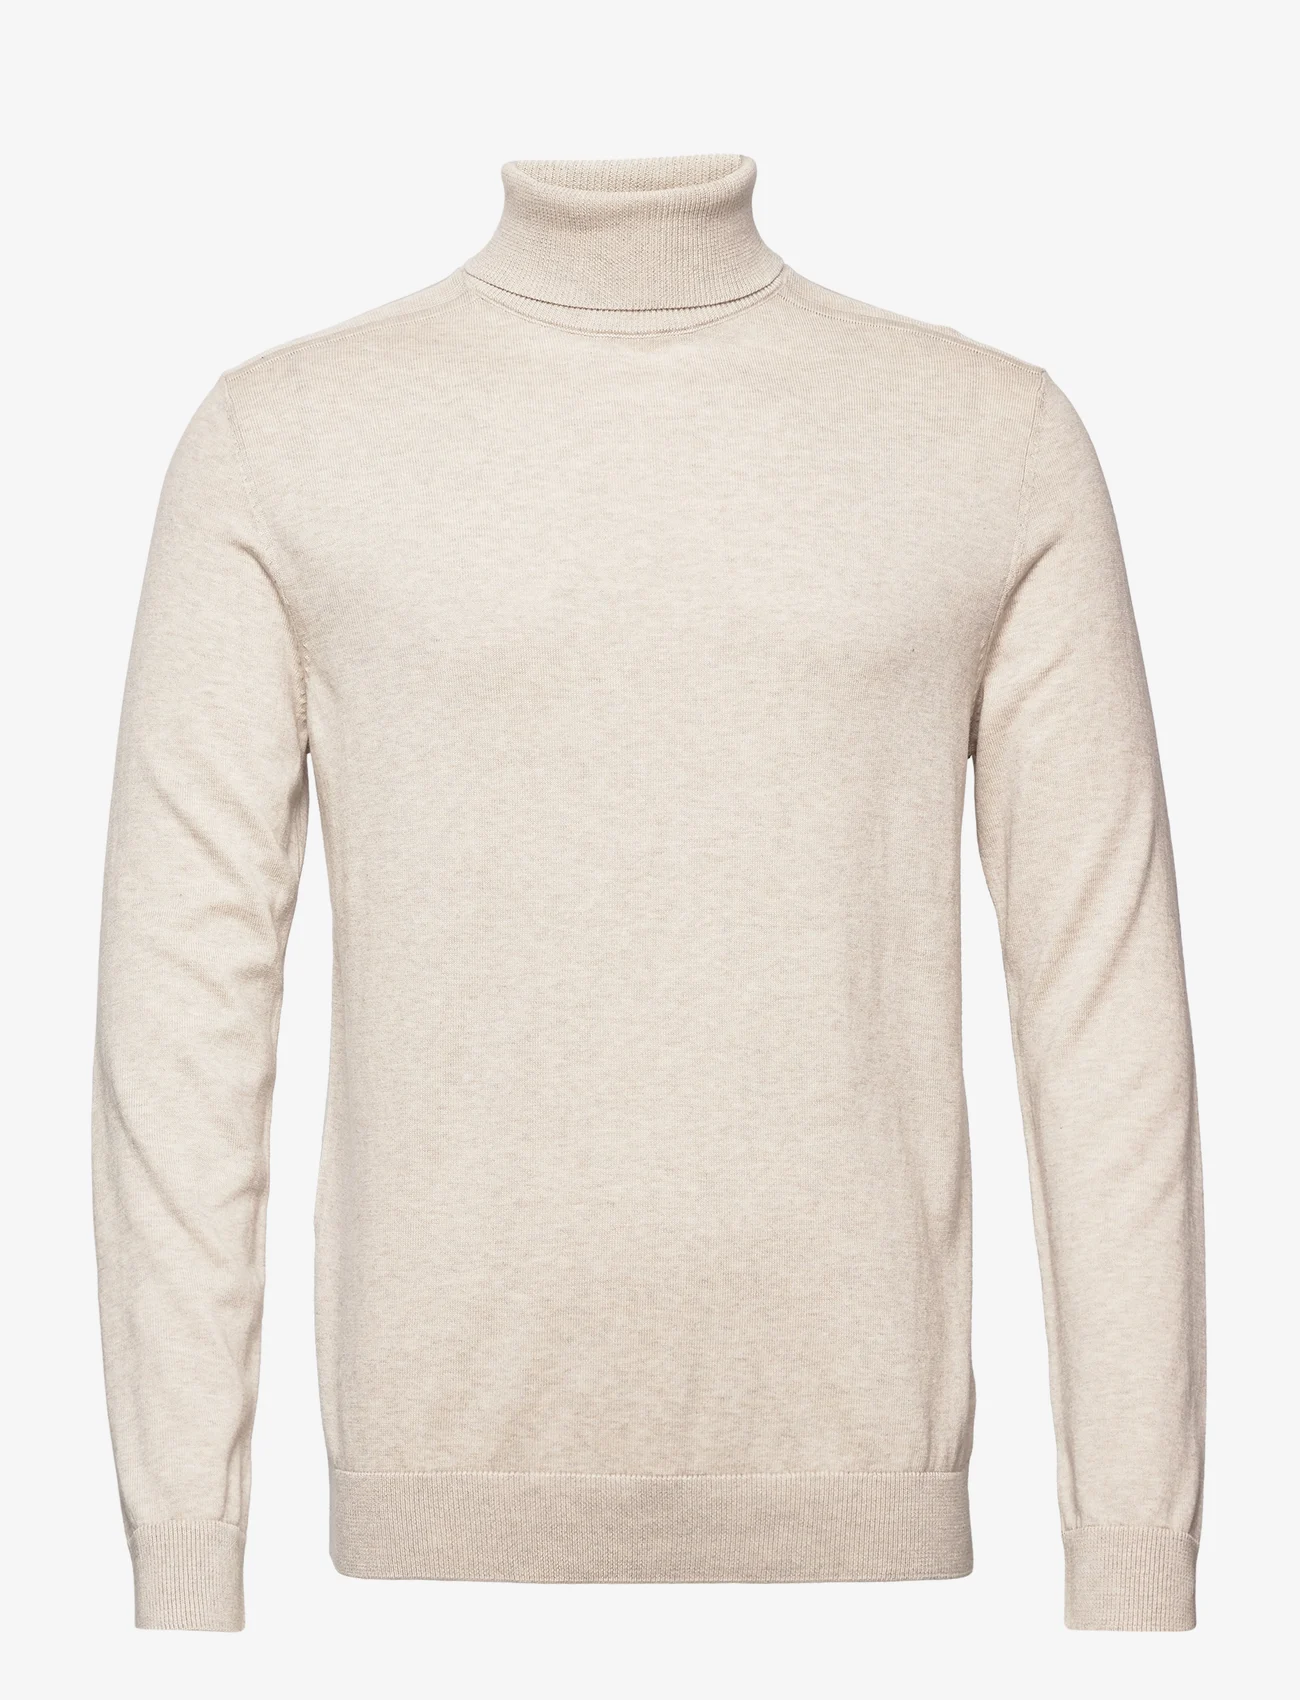 Selected Homme - SLHBERG ROLL NECK B - stickade basplagg - oatmeal - 0